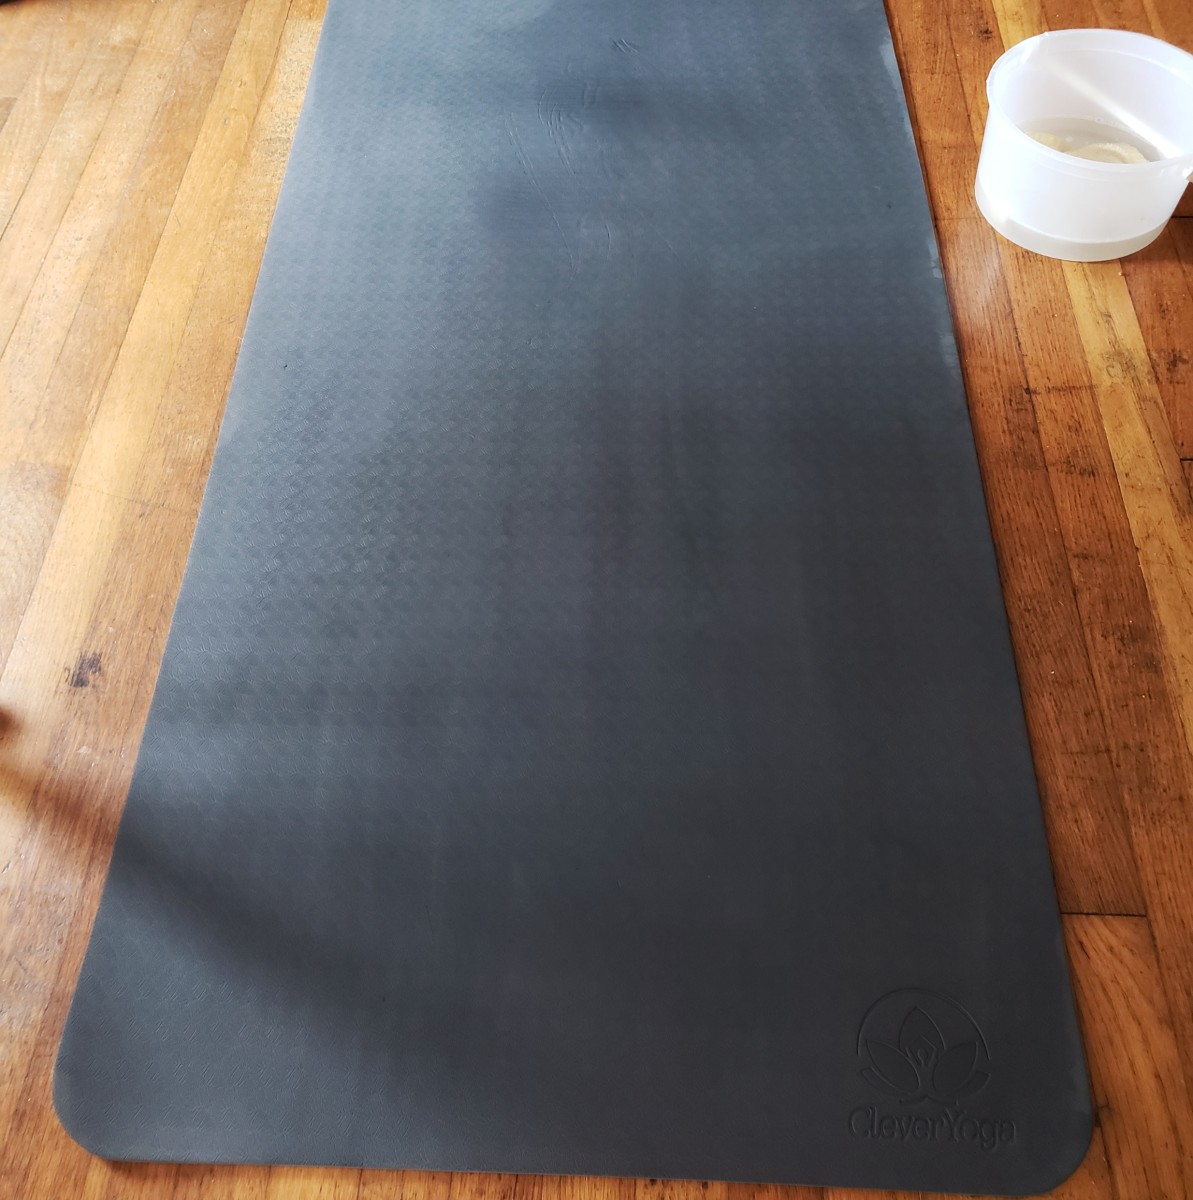 A Quick and Simple Way to Clean Your Yoga Mat | CalorieBee